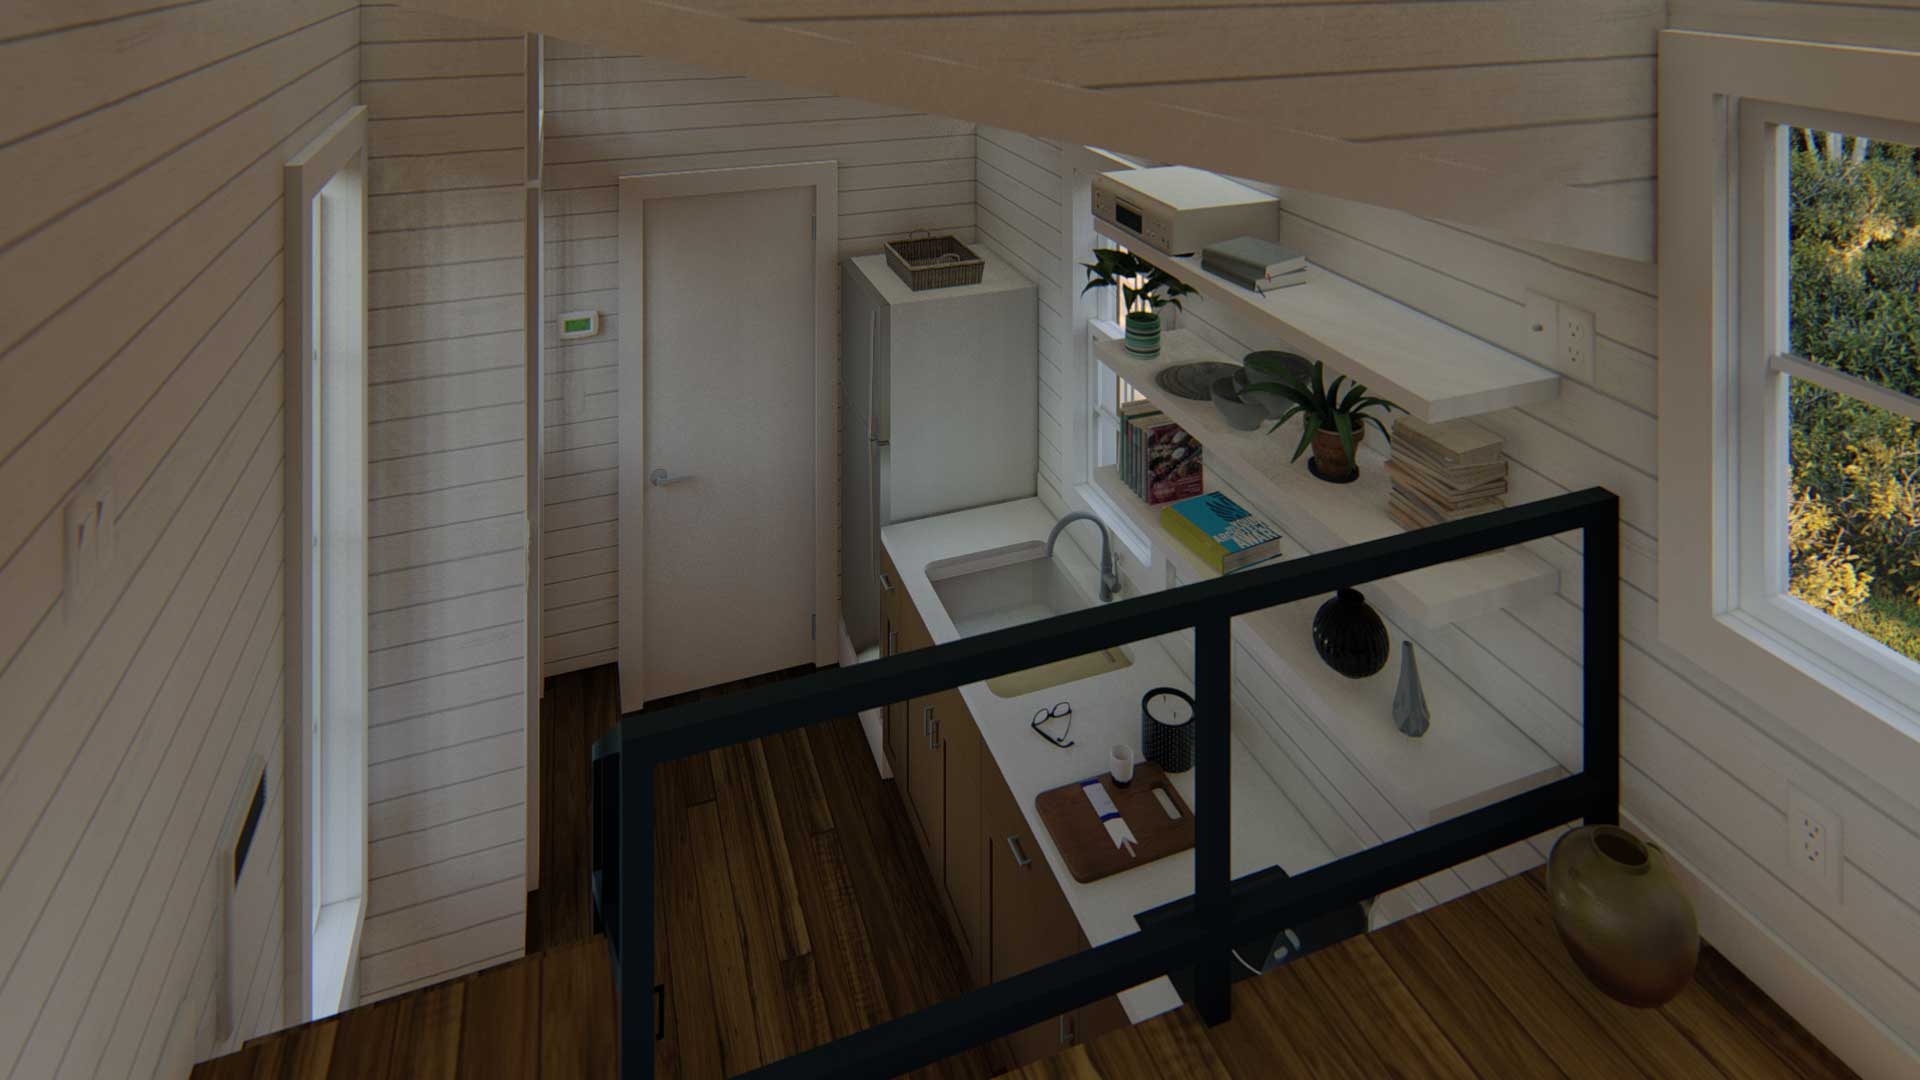 3D model of interior of keepsake tiny home in the craftsman style